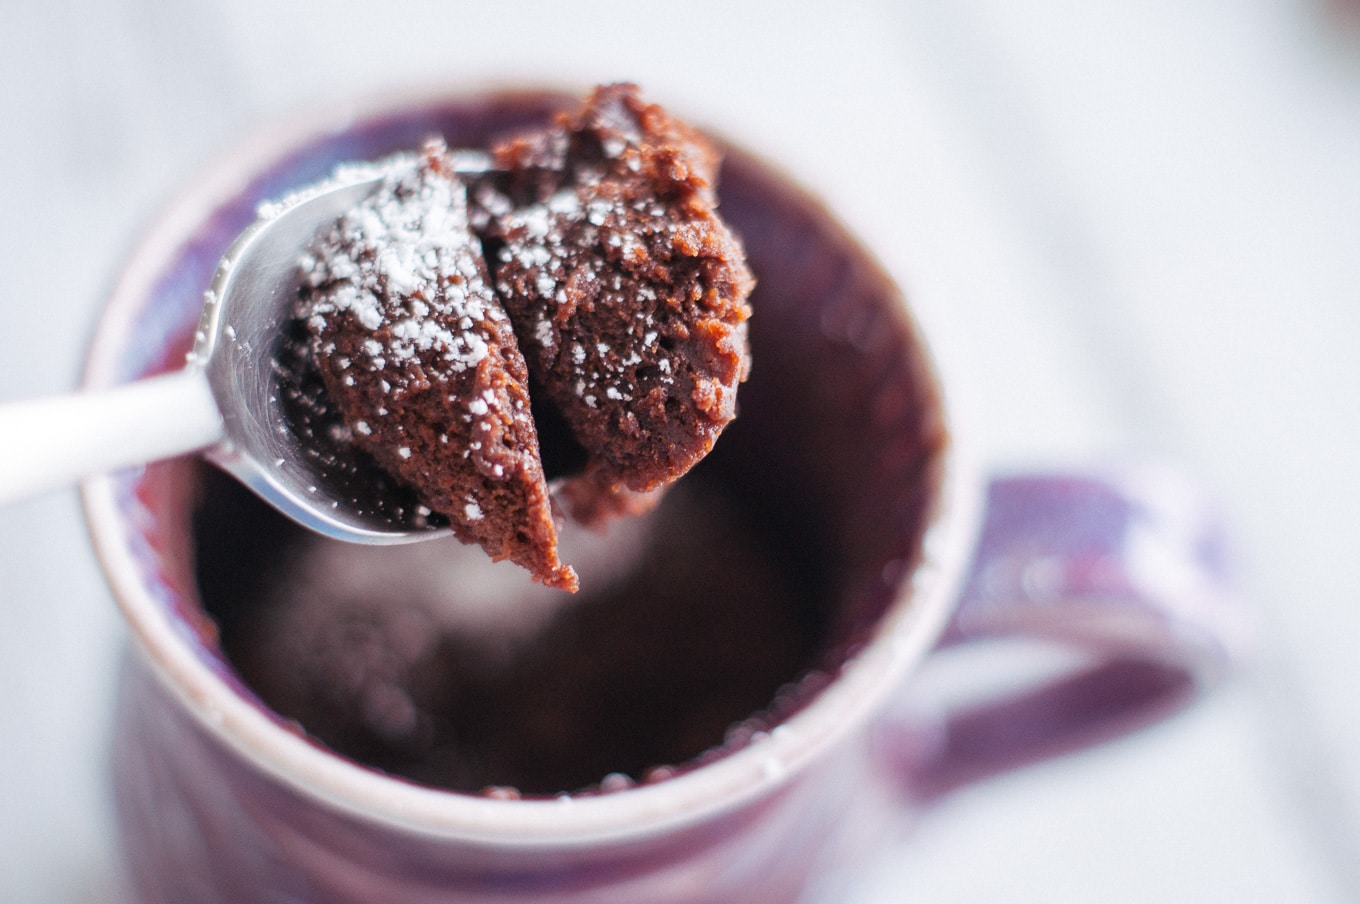 Chocolate mug cake on a spoon with eponymous mug blurred in the background.